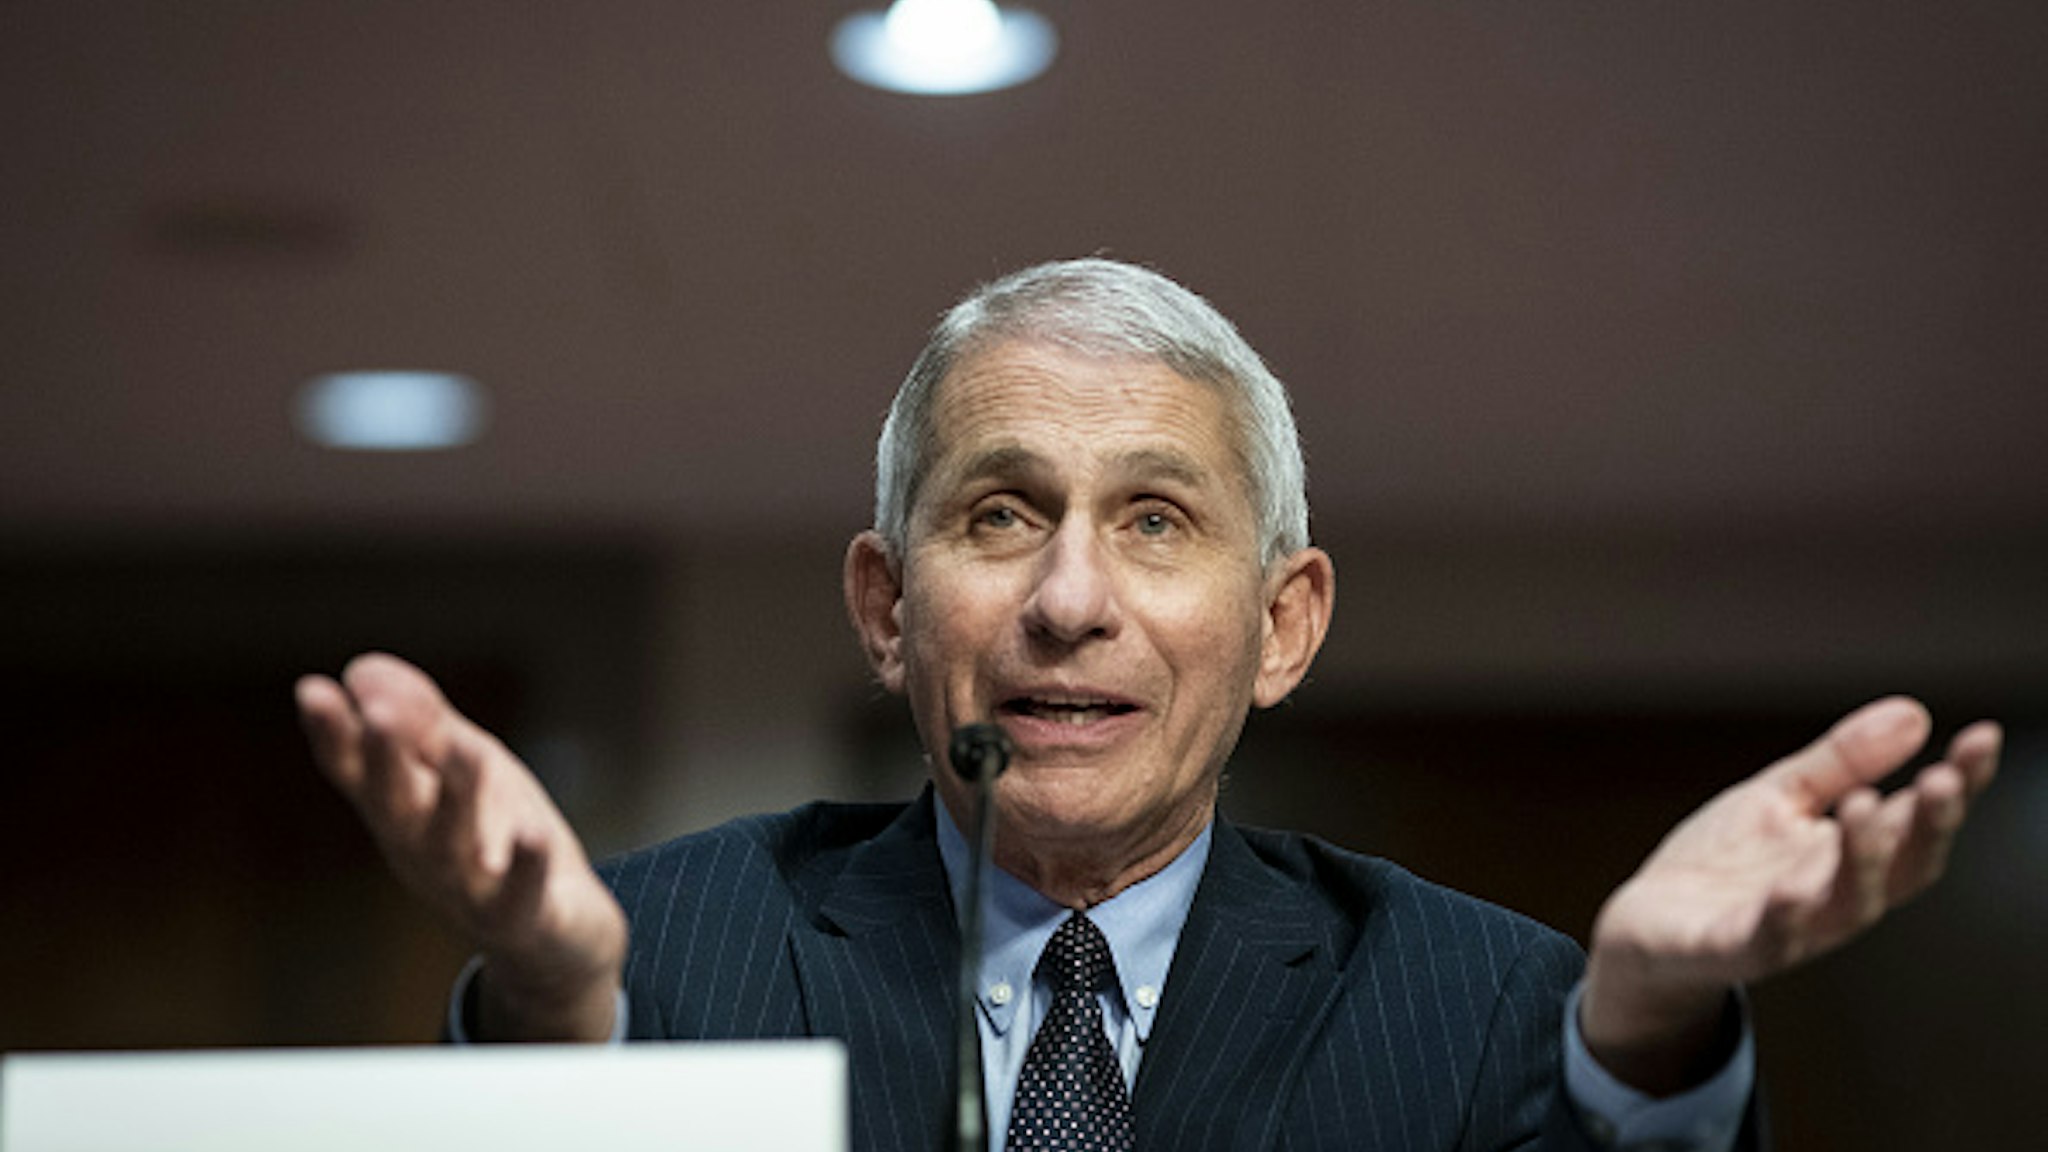 Anthony Fauci, director of the National Institute of Allergy and Infectious Diseases, speaks during a Senate Health, Education, Labor and Pensions Committee hearing in Washington, D.C., U.S., on Tuesday, June 30, 2020. The U.S. government's top infectious disease specialist said he's "quite concerned" about the spike in cronavirus cases in Florida, Texas, Arizona and California.